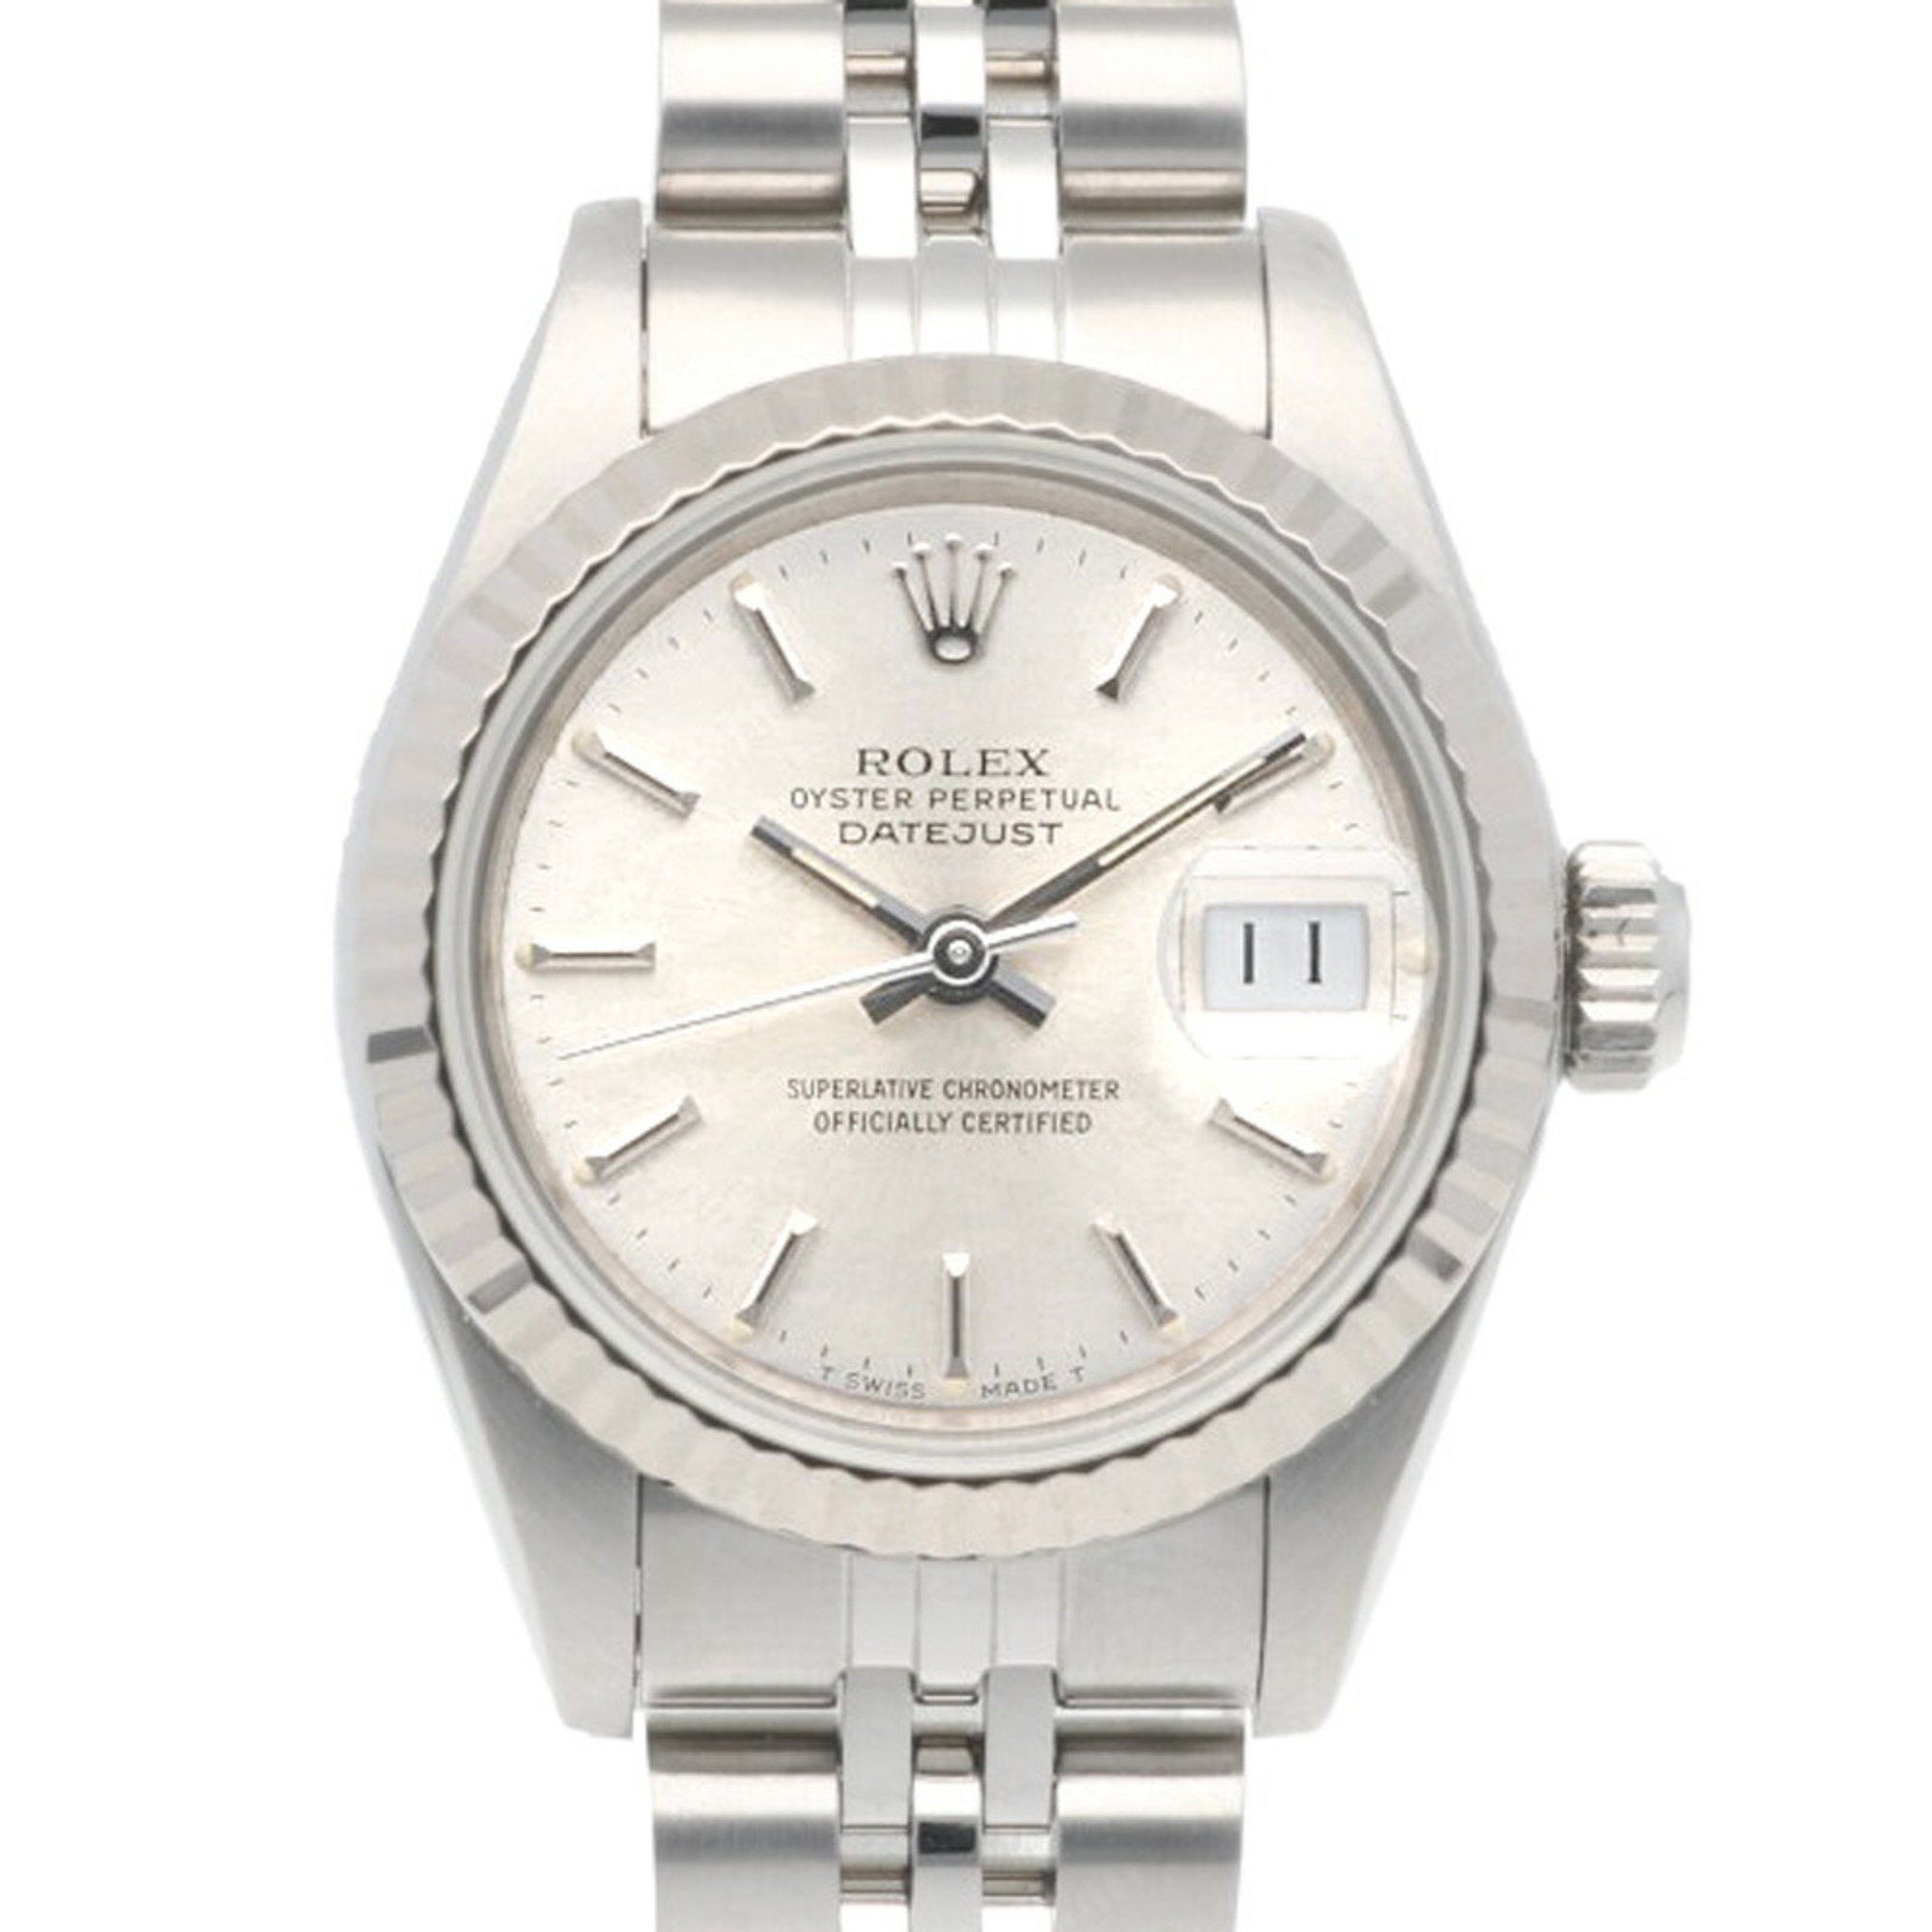 Rolex Datejust Oyster Perpetual Watch Stainless Steel 69174 Automatic Ladies ROLEX R serial 1987-1988 Overhauled